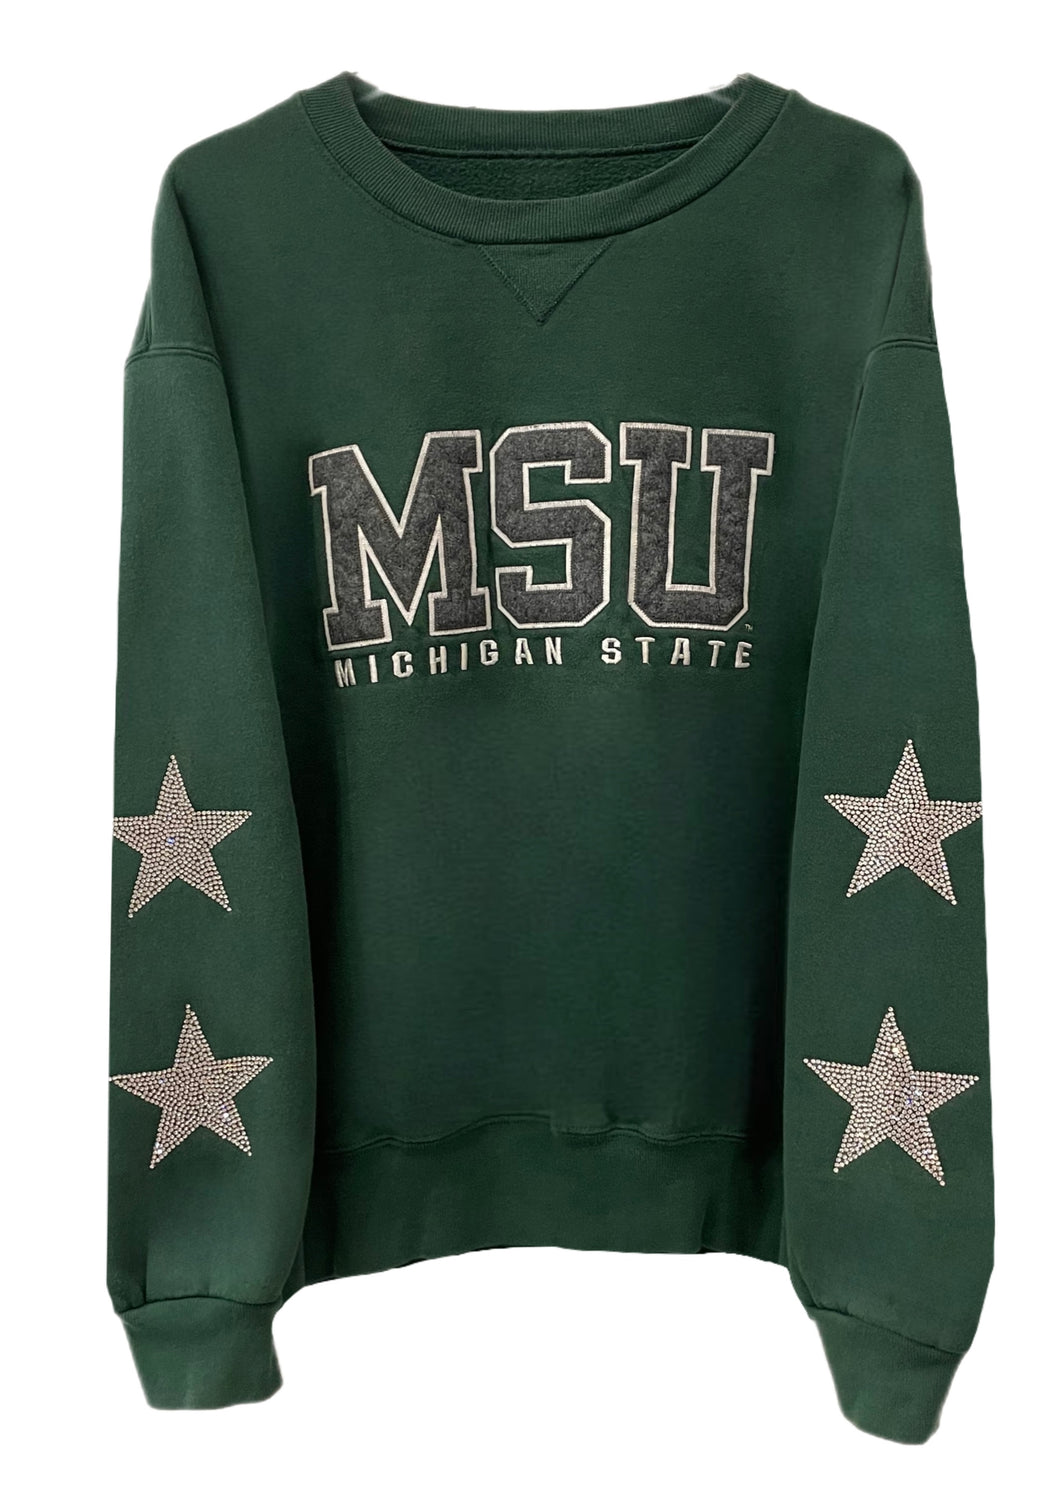 Michigan State University, One of a KIND Vintage Sweatshirt with Crystal Star Design